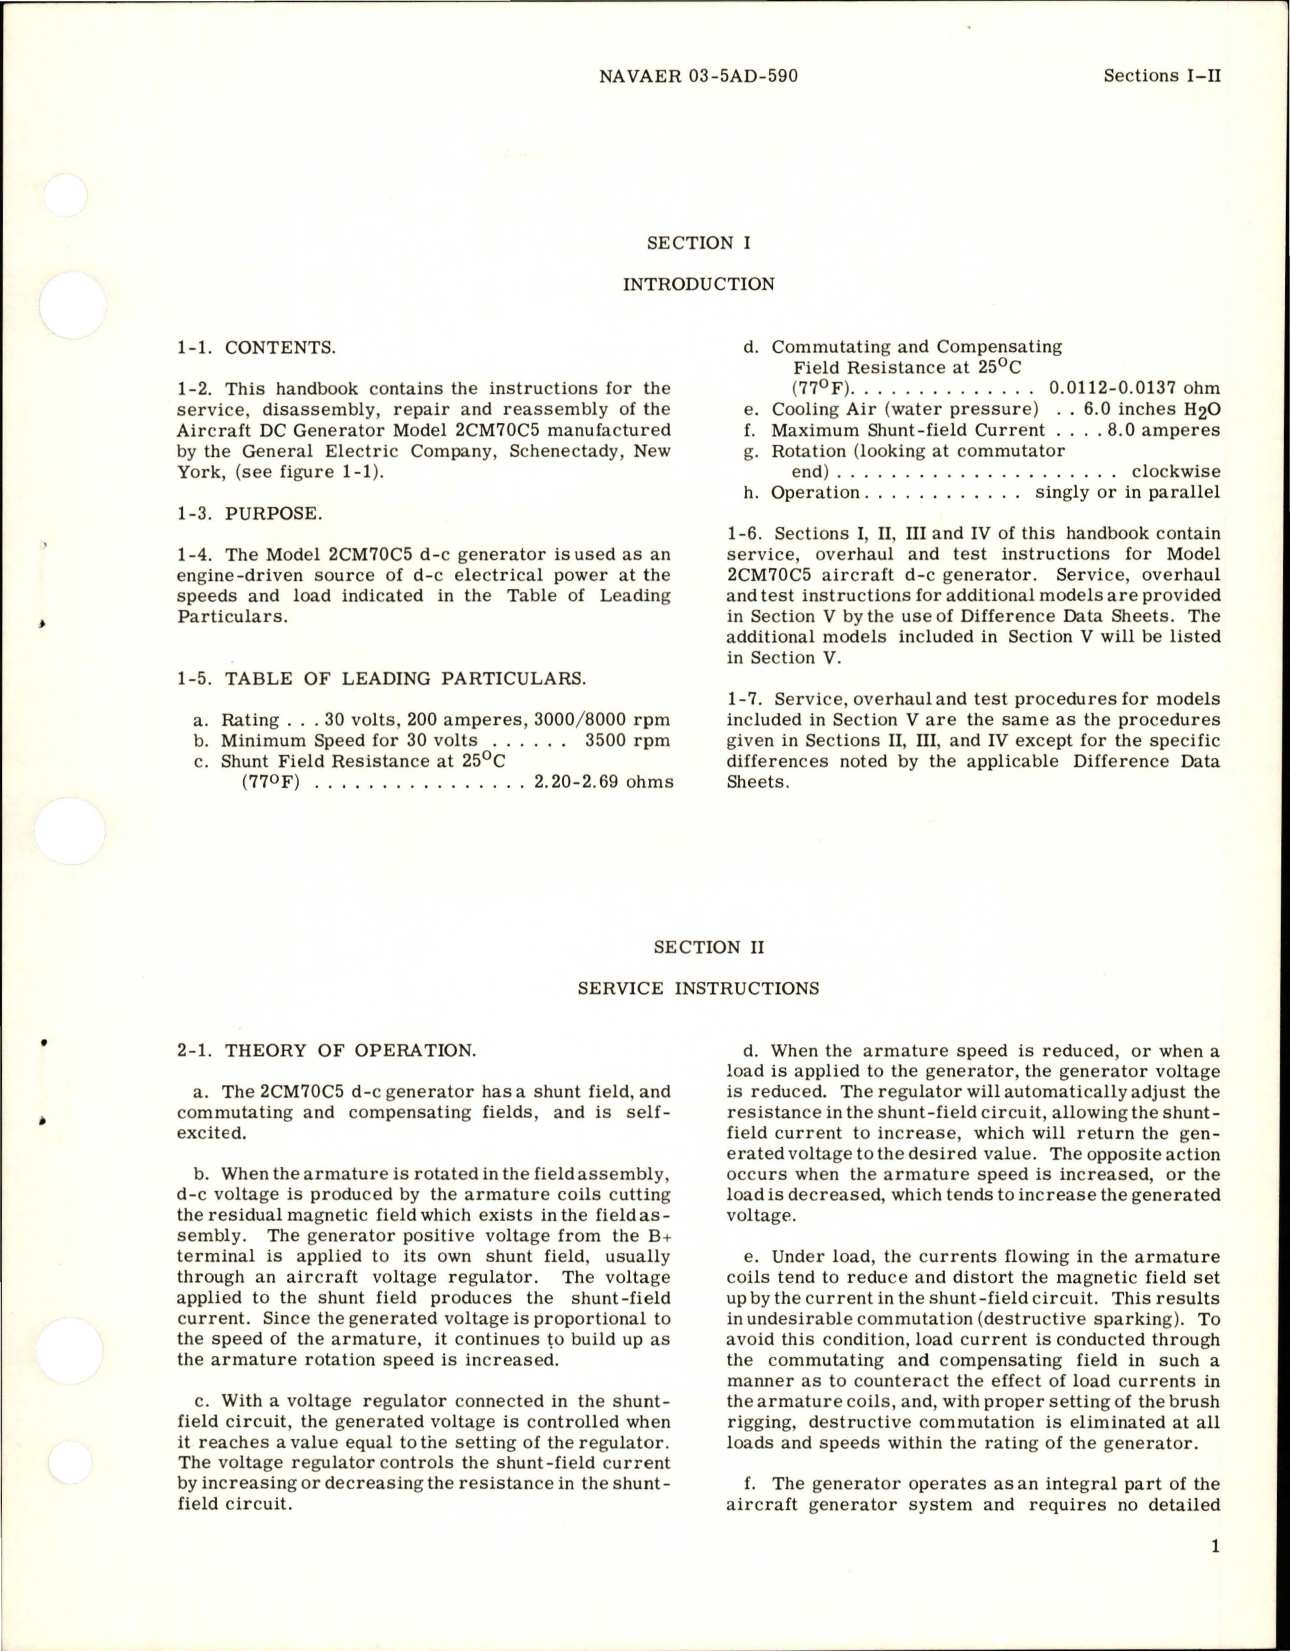 Sample page 5 from AirCorps Library document: Overhaul and Service Instructions for DC Generator - Models 2CM70C5 and 2CM70D2 